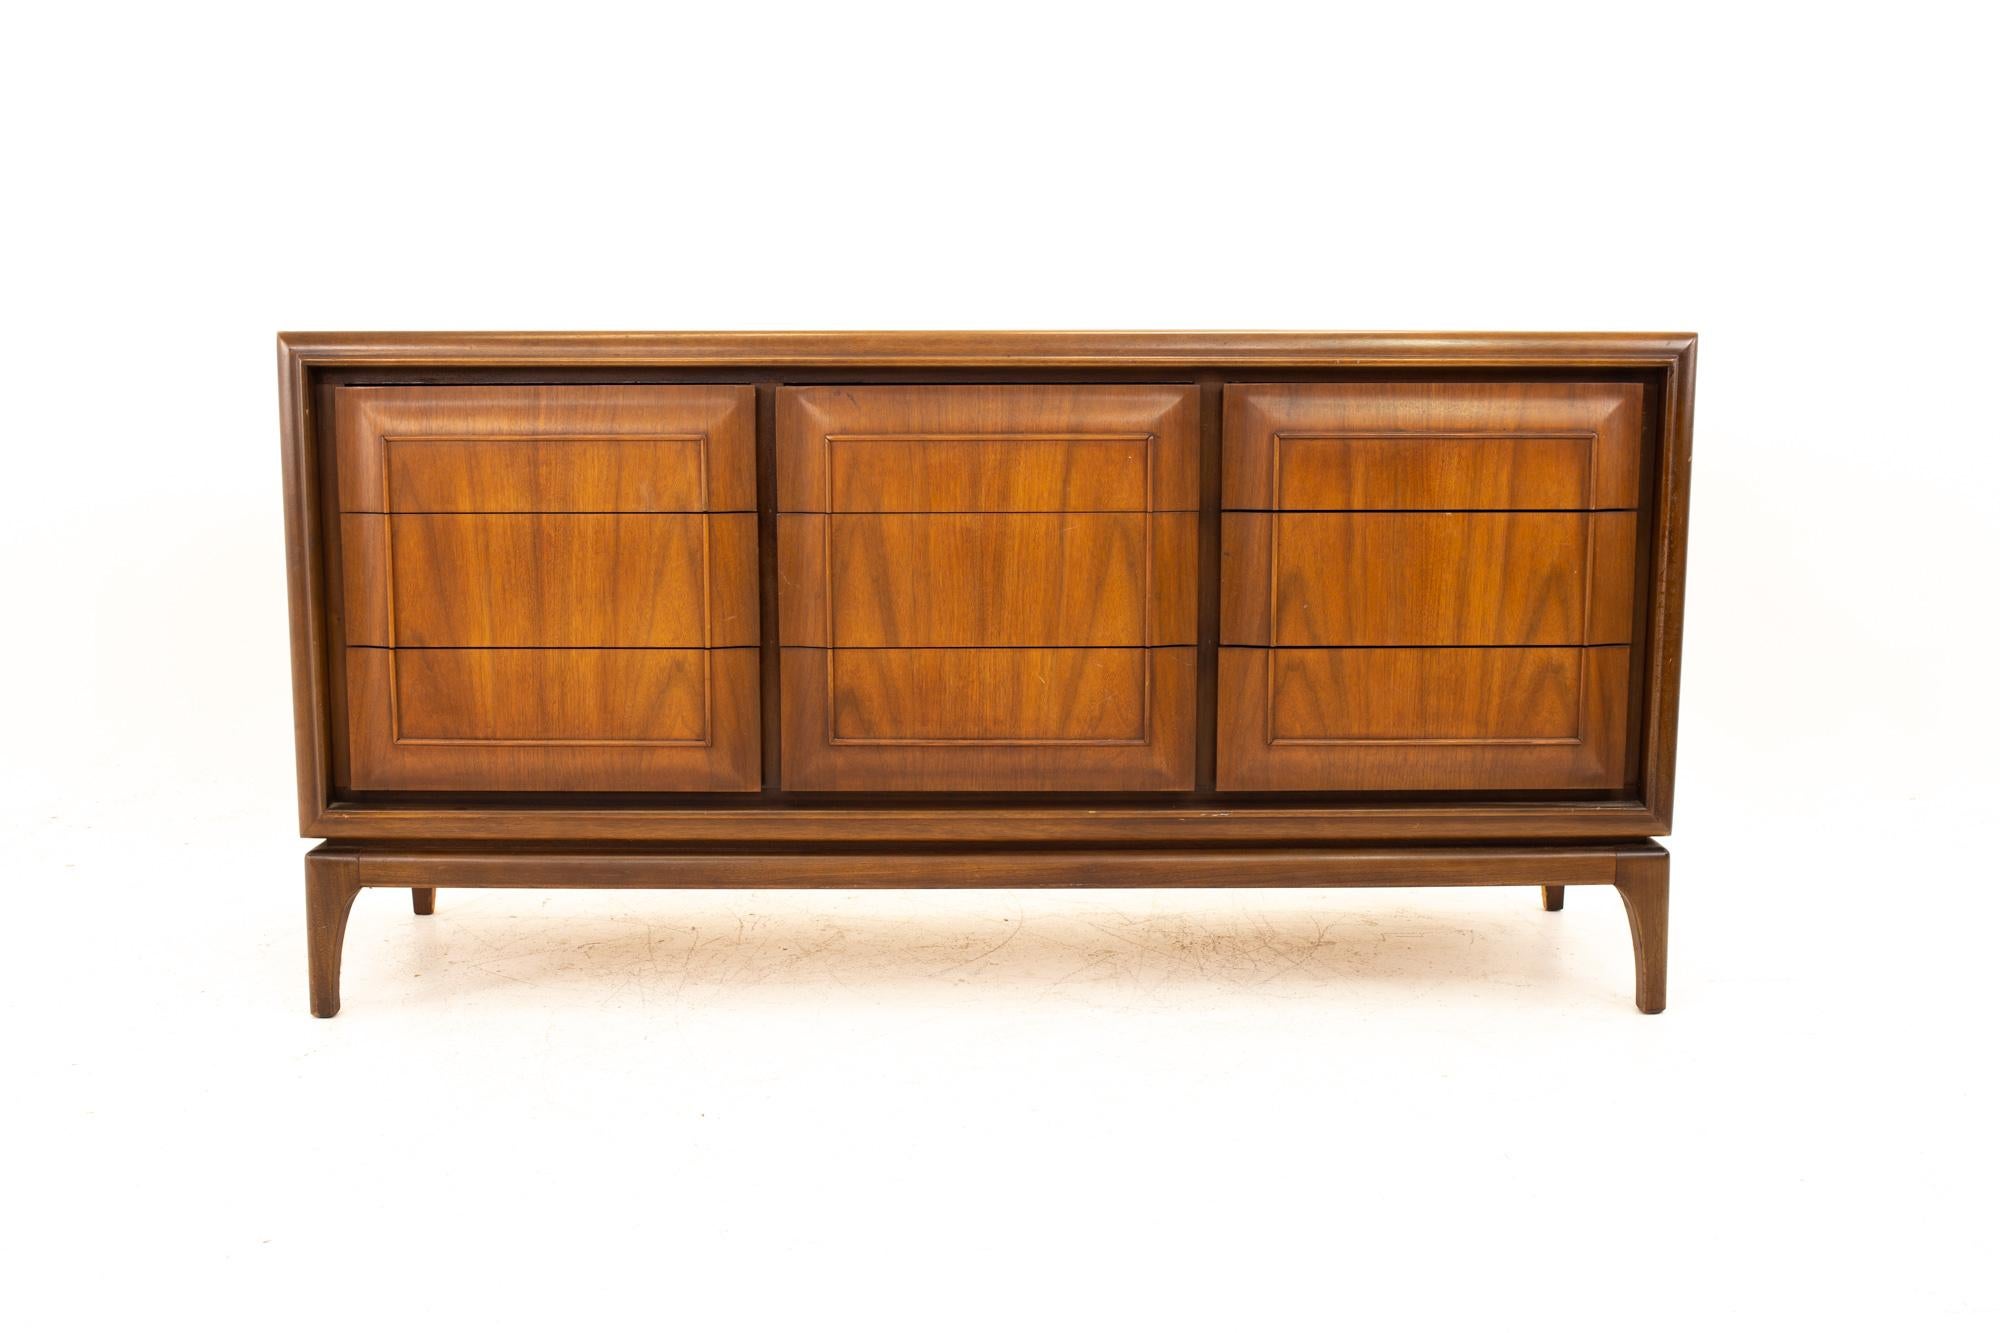 United Furniture Mid Century Walnut 9 Drawer Lowboy Dresser

Dresser measures: 64 wide x 19 deep x 32 inches high

All pieces of furniture can be had in what we call restored vintage condition. That means the piece is restored upon purchase so it’s